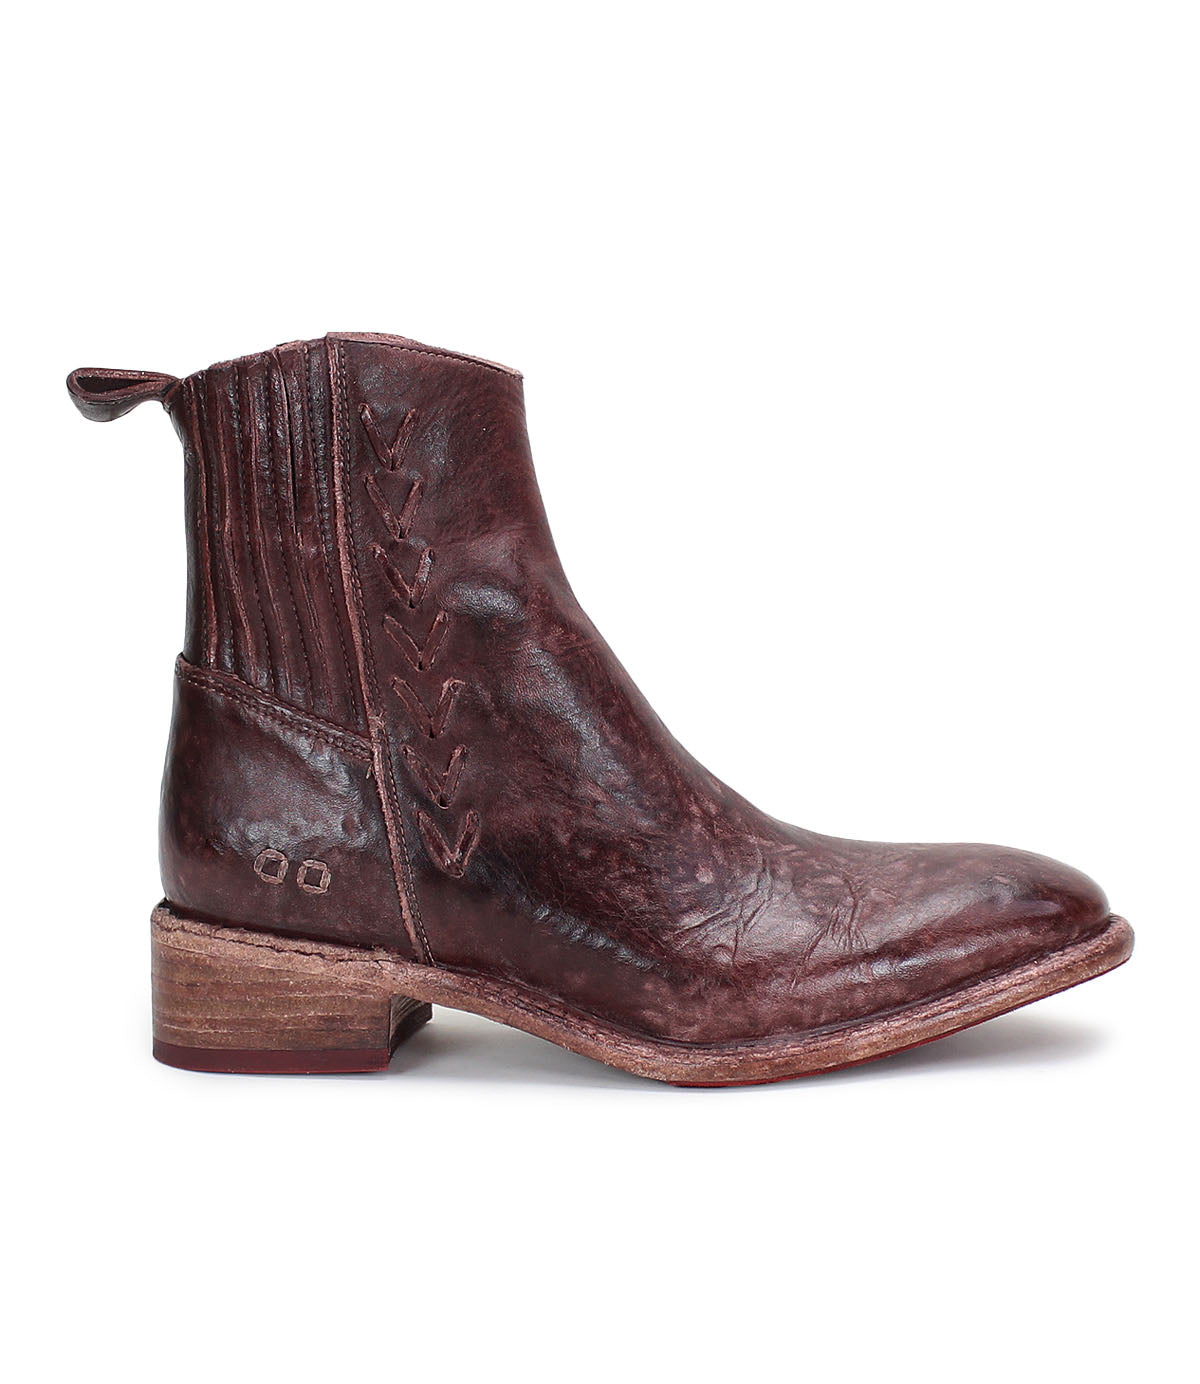 A brown leather Alina ankle boot with a wooden sole from Bed Stu.